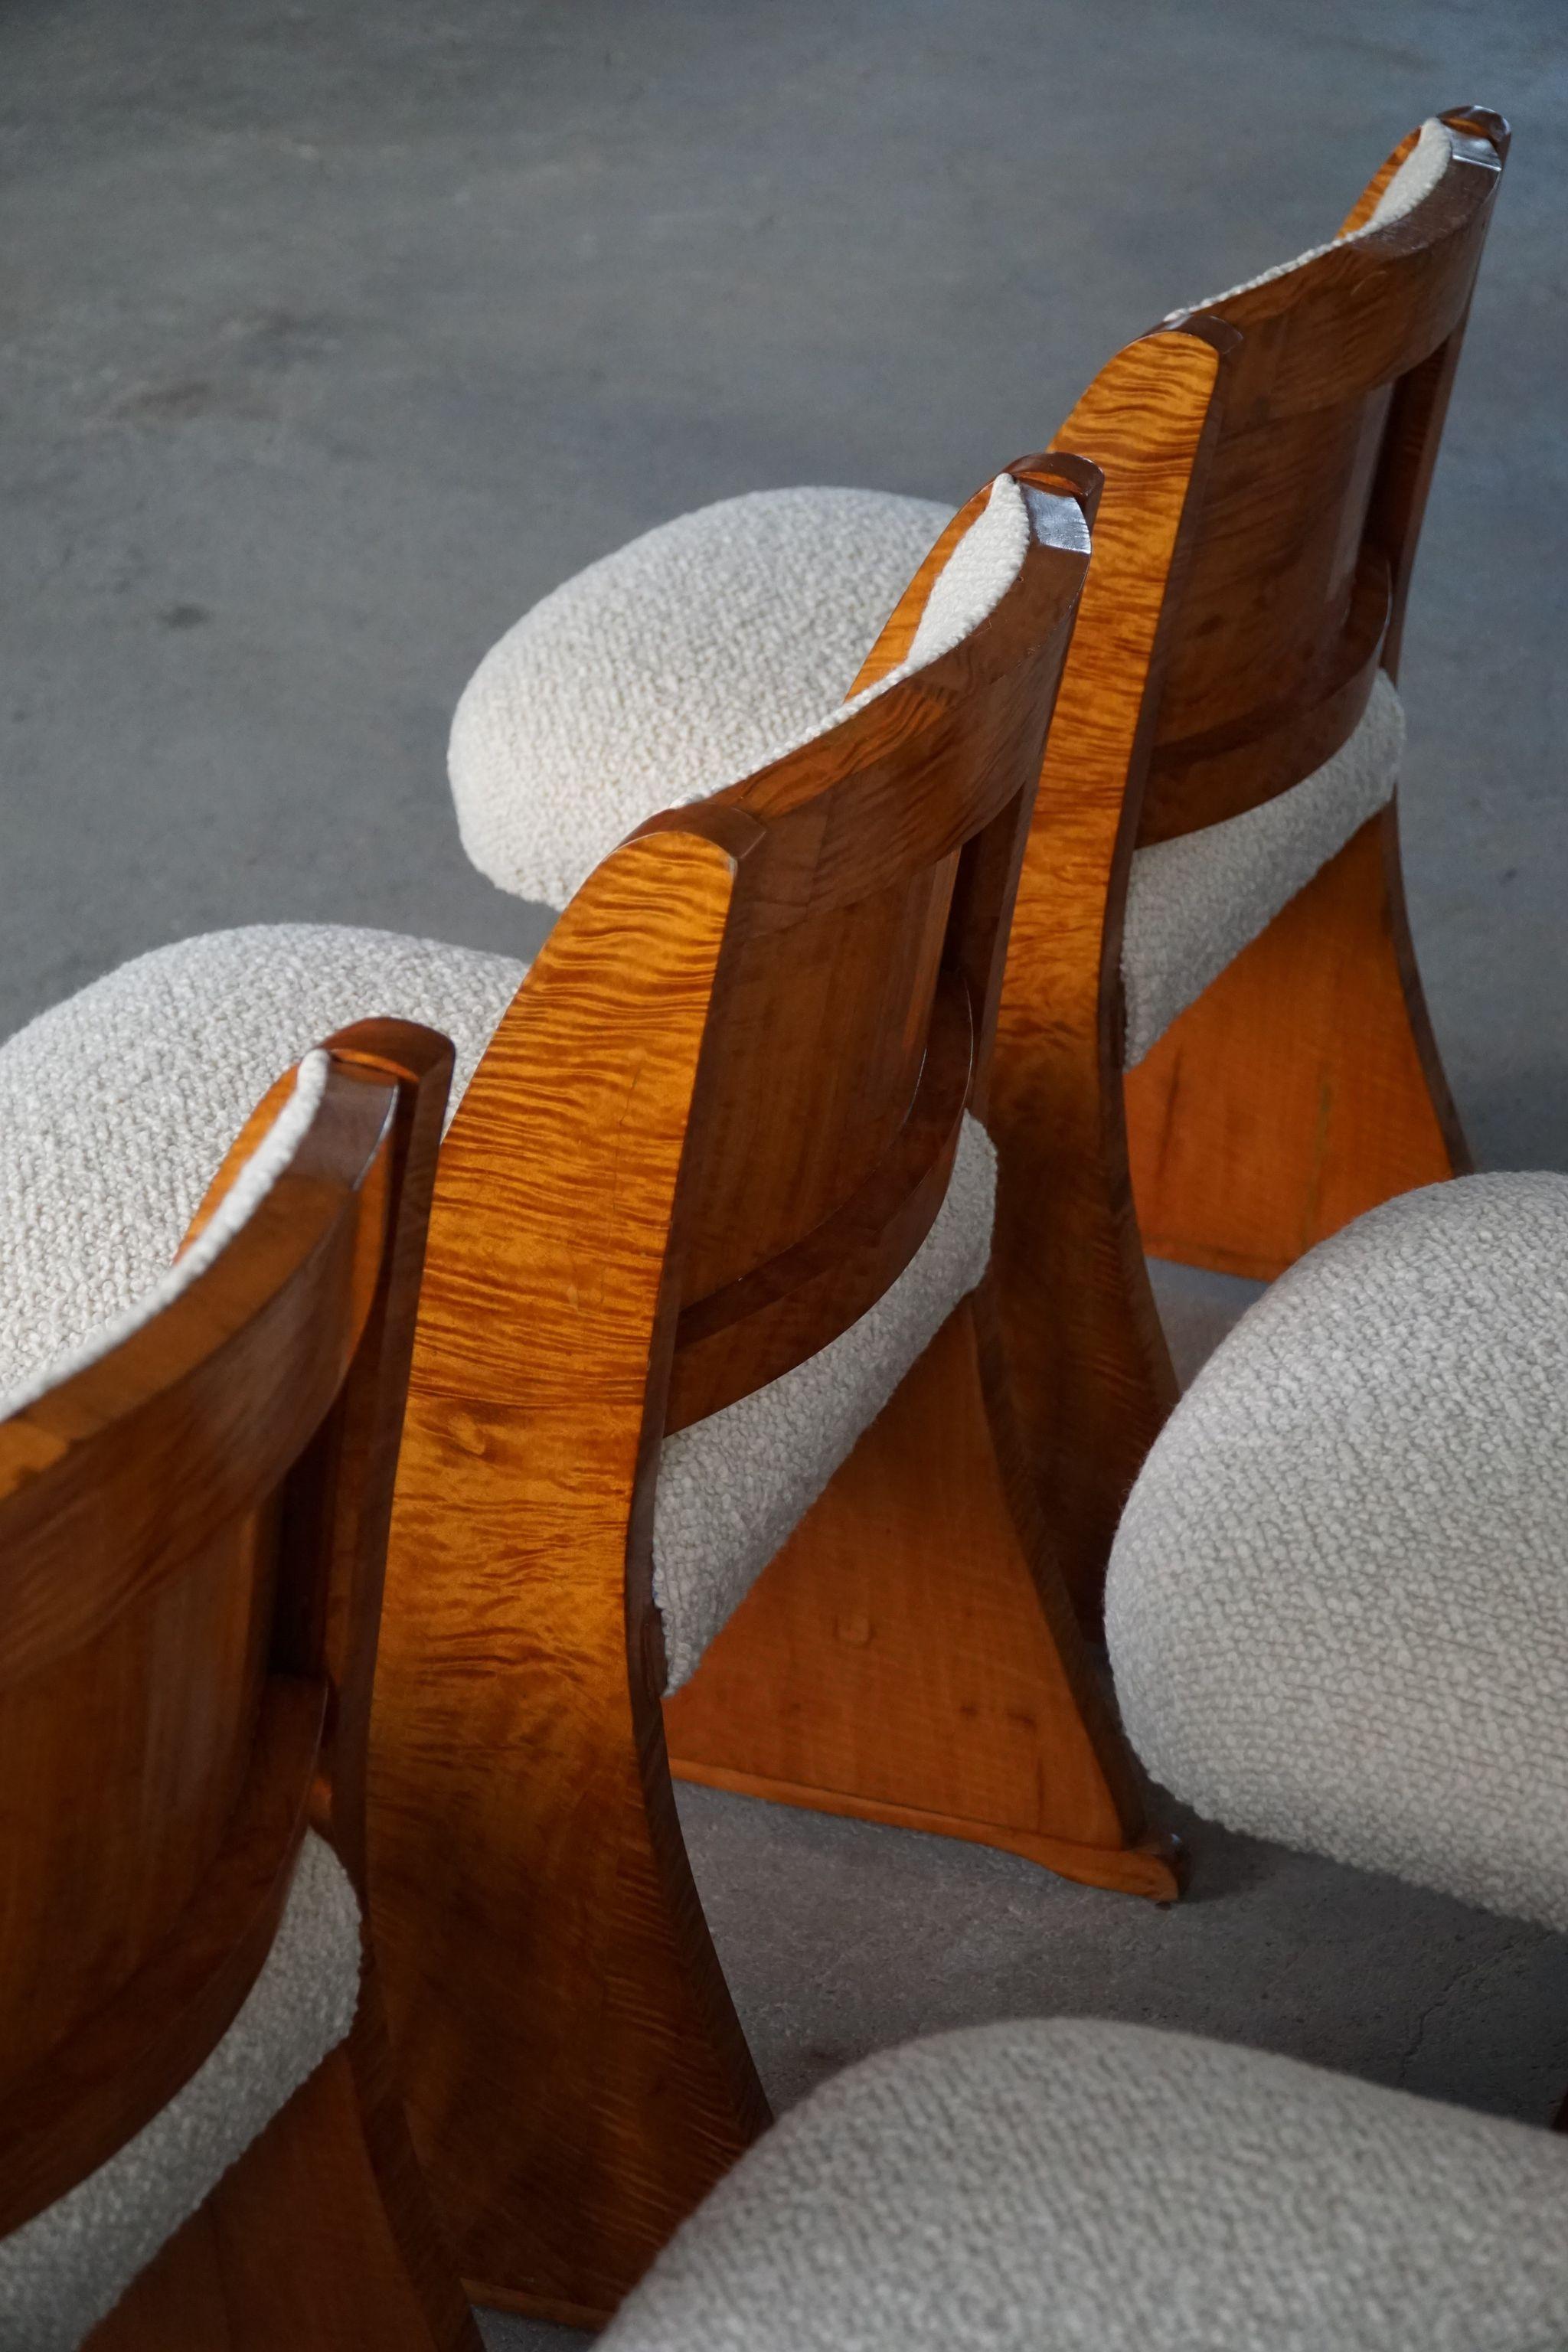 20th Century Art Deco, Set of 6 Dining Chairs in Birch & Bouclé, Danish Design, Made in 1930s